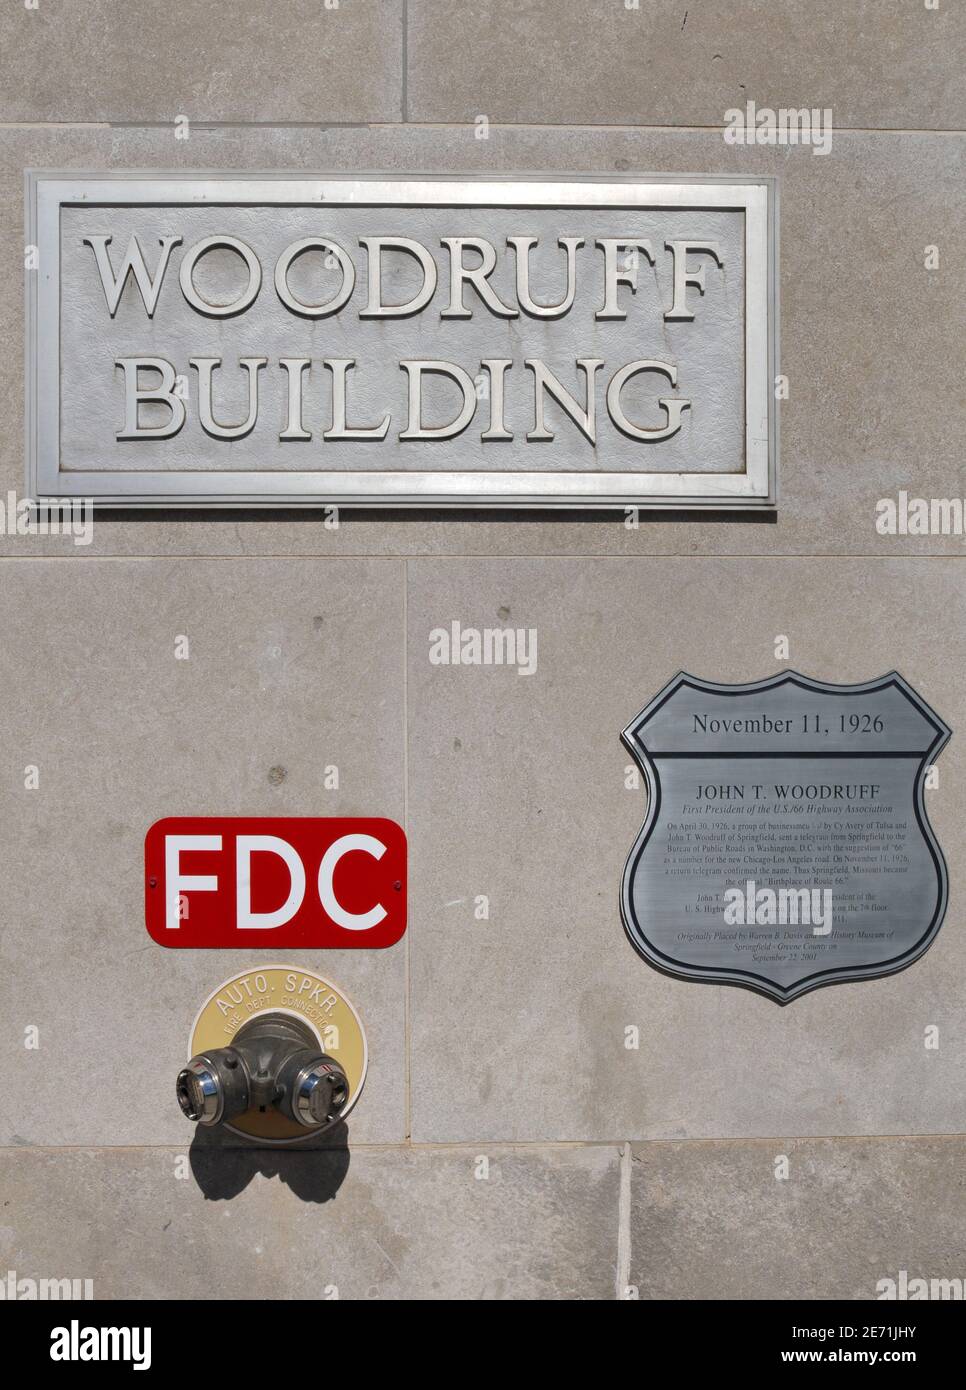 A heritage plaque adorns the historic Woodruff Building in downtown Springfield, noting builder John T. Woodruff's role in the creation of Route 66. Stock Photo